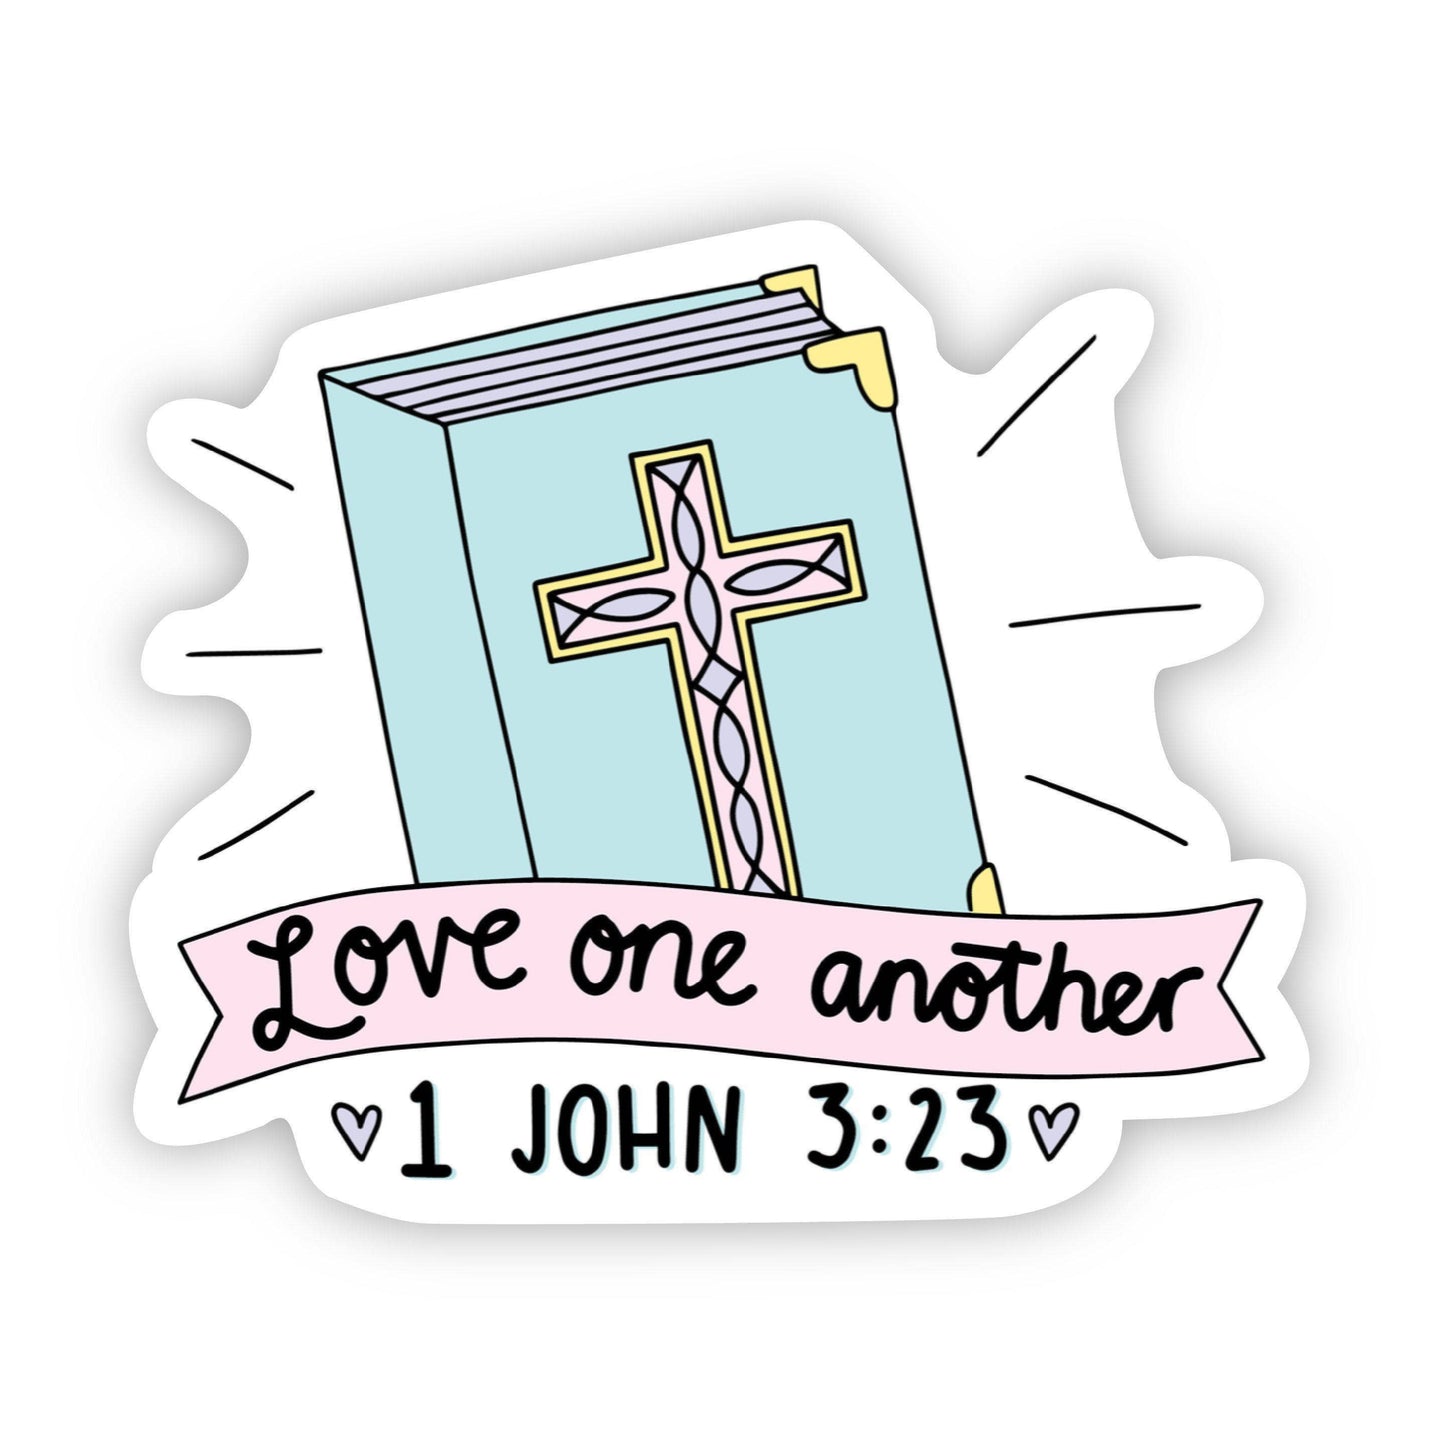 Sticker-Religion-01: Love one another Bible - 1 John 3:23